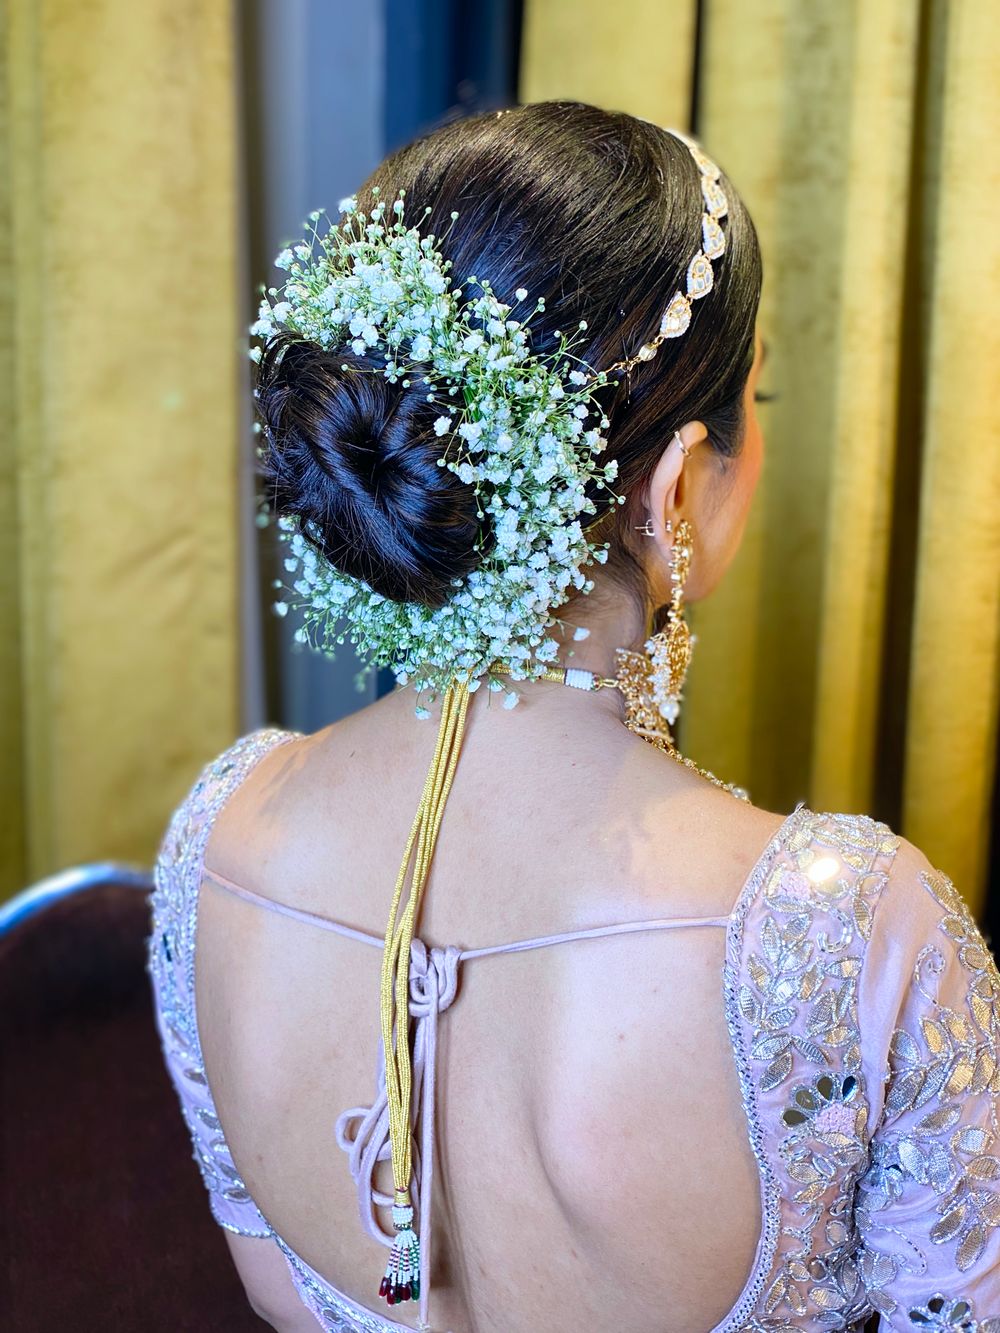 Photo From WMG: Hairstyles - By Makeup by Saakshi Takiar